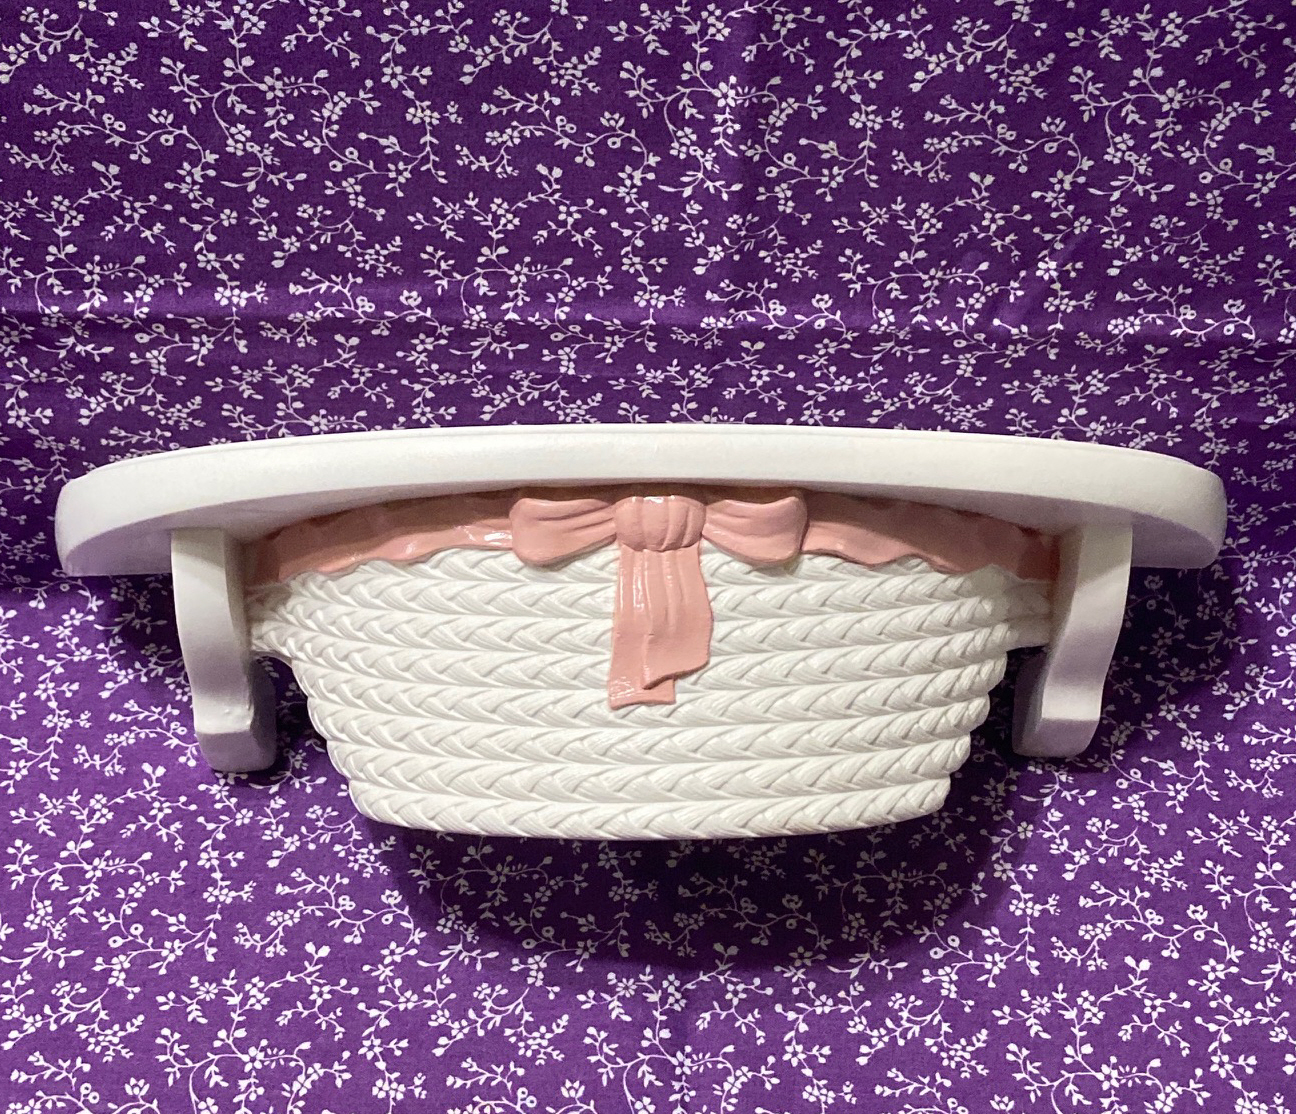 Vintage Burwood wall shelf white weave design with pink bow Home Interiors 1989 - $15.00